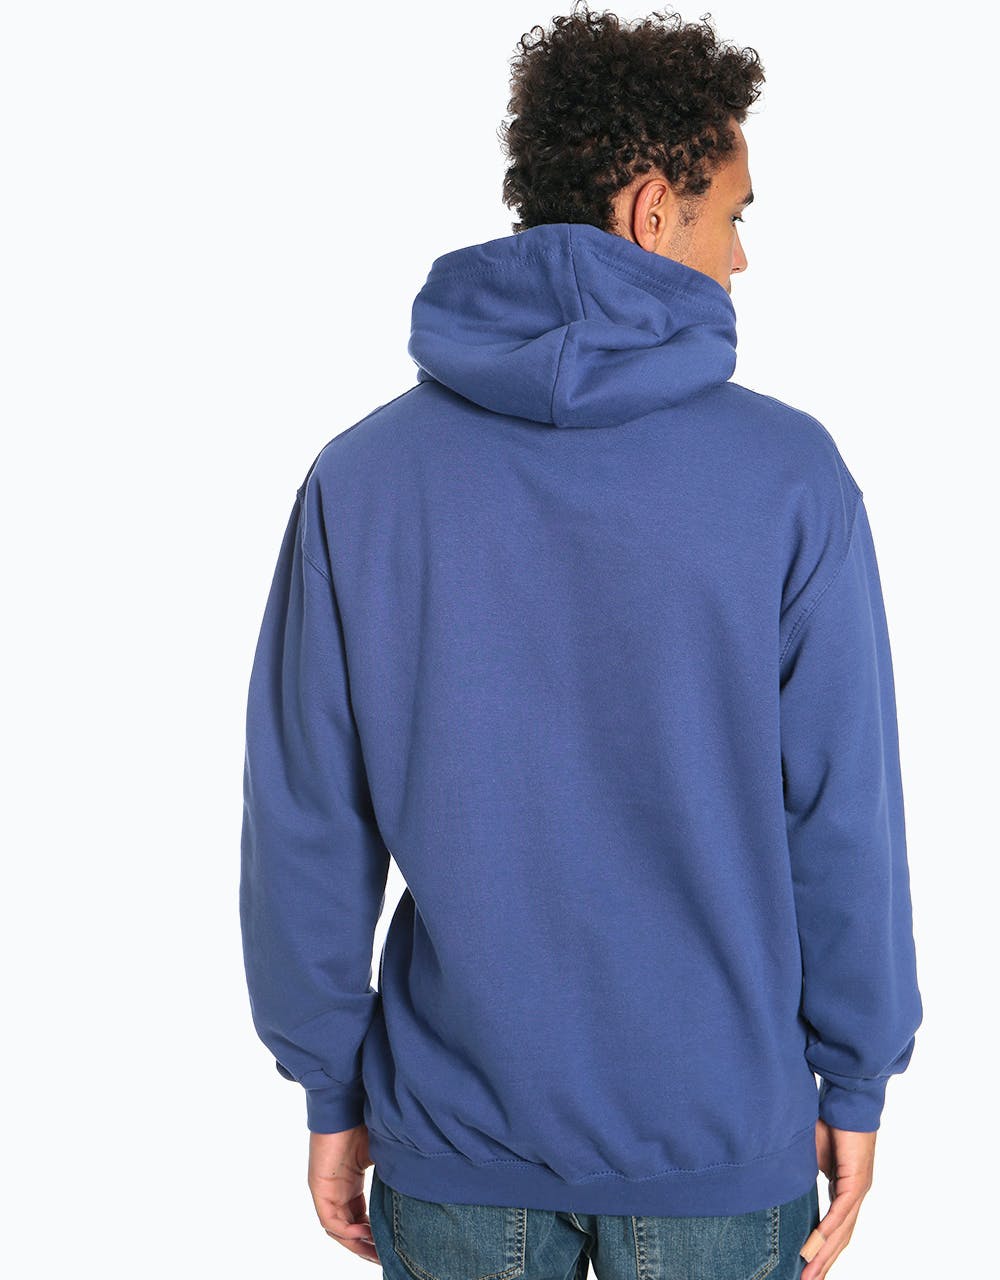 Route One Heavy Pullover Hoodie - Denim Blue